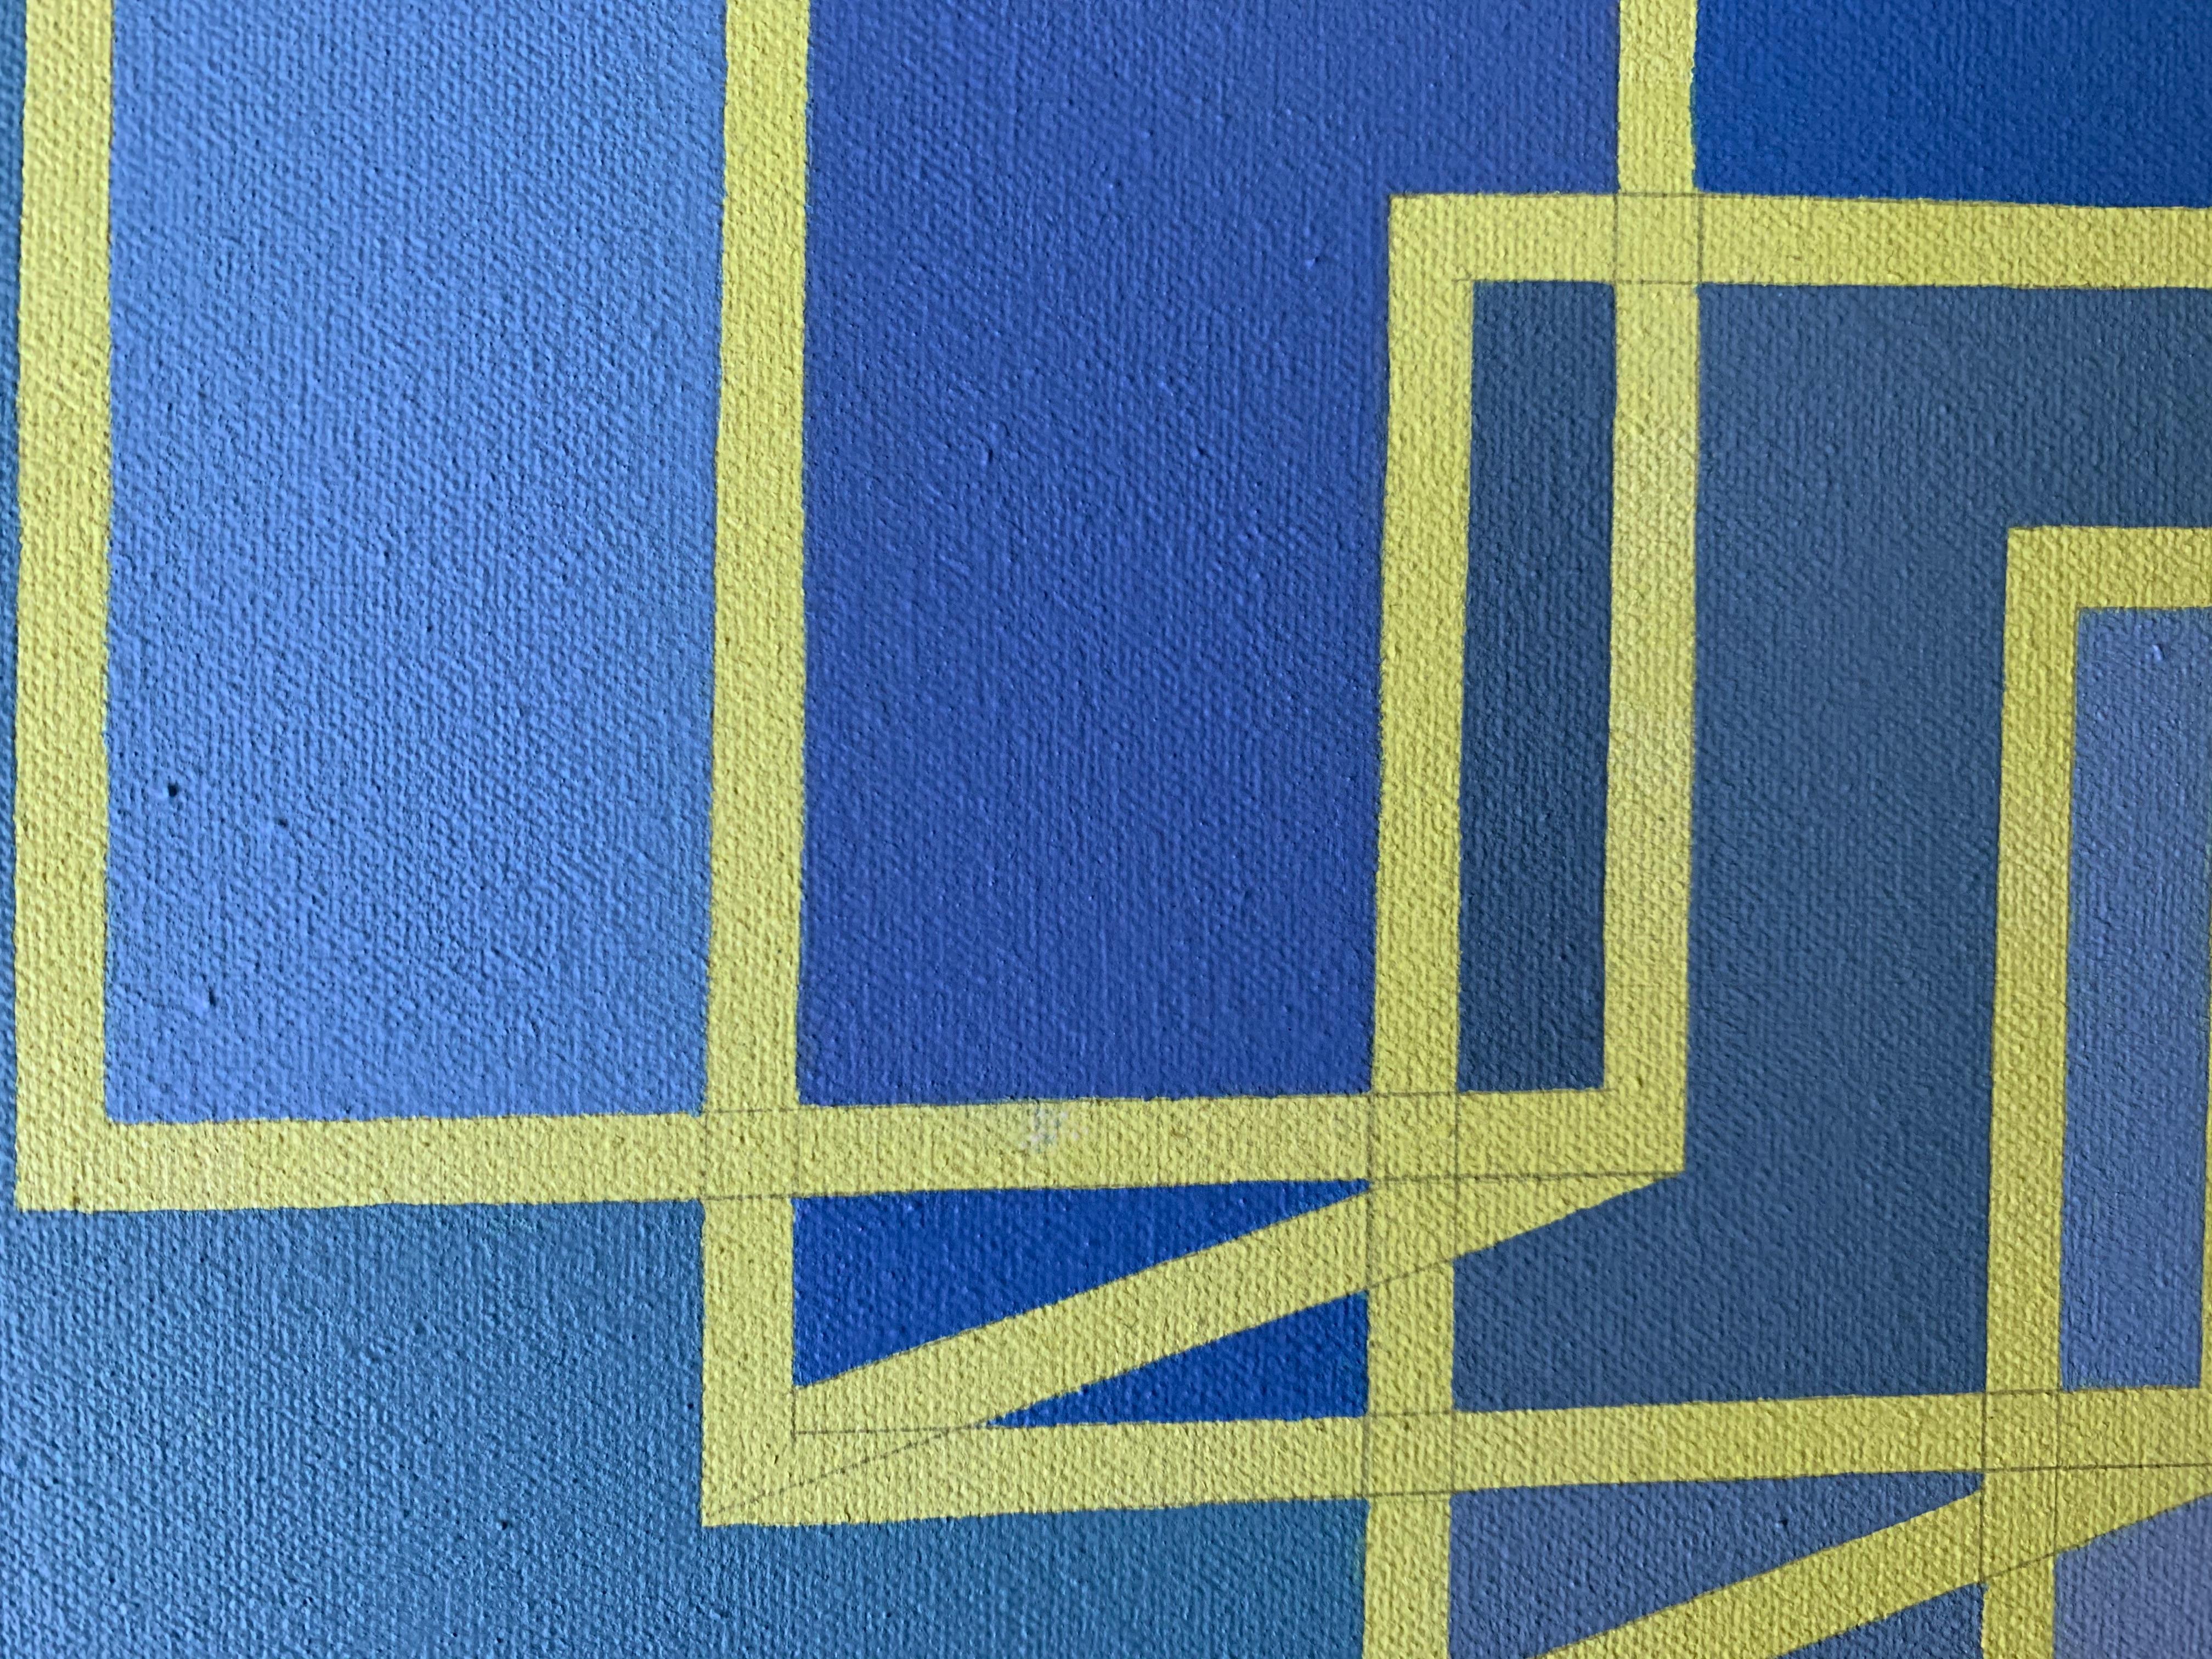 Ascending/Descending #10: geometric Op Art abstract painting w/ blue & yellow - Painting by Benjamin Weaver